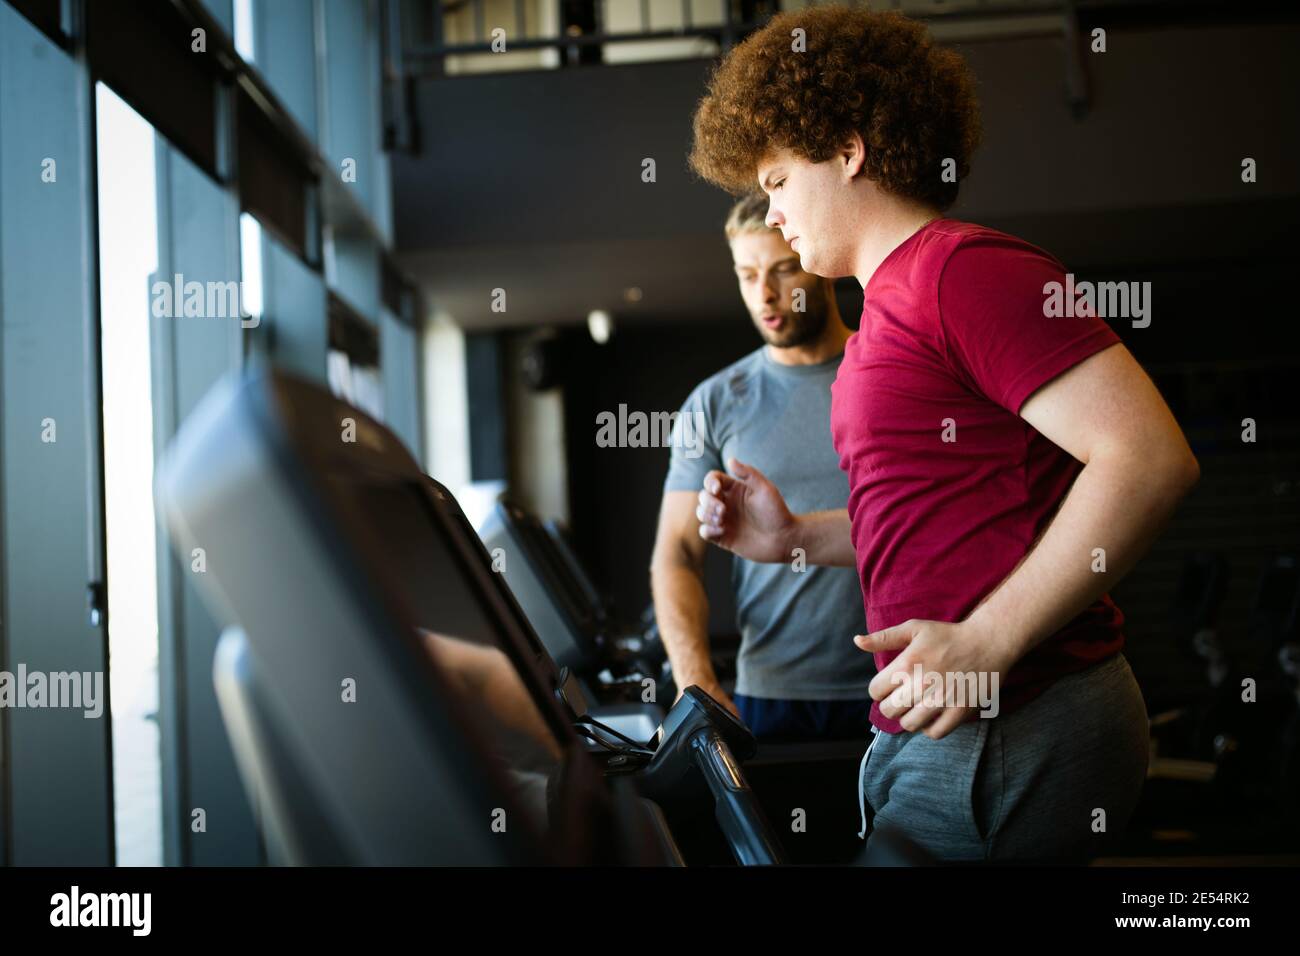 Overweight young man with trainer exercising in gym Stock Photo